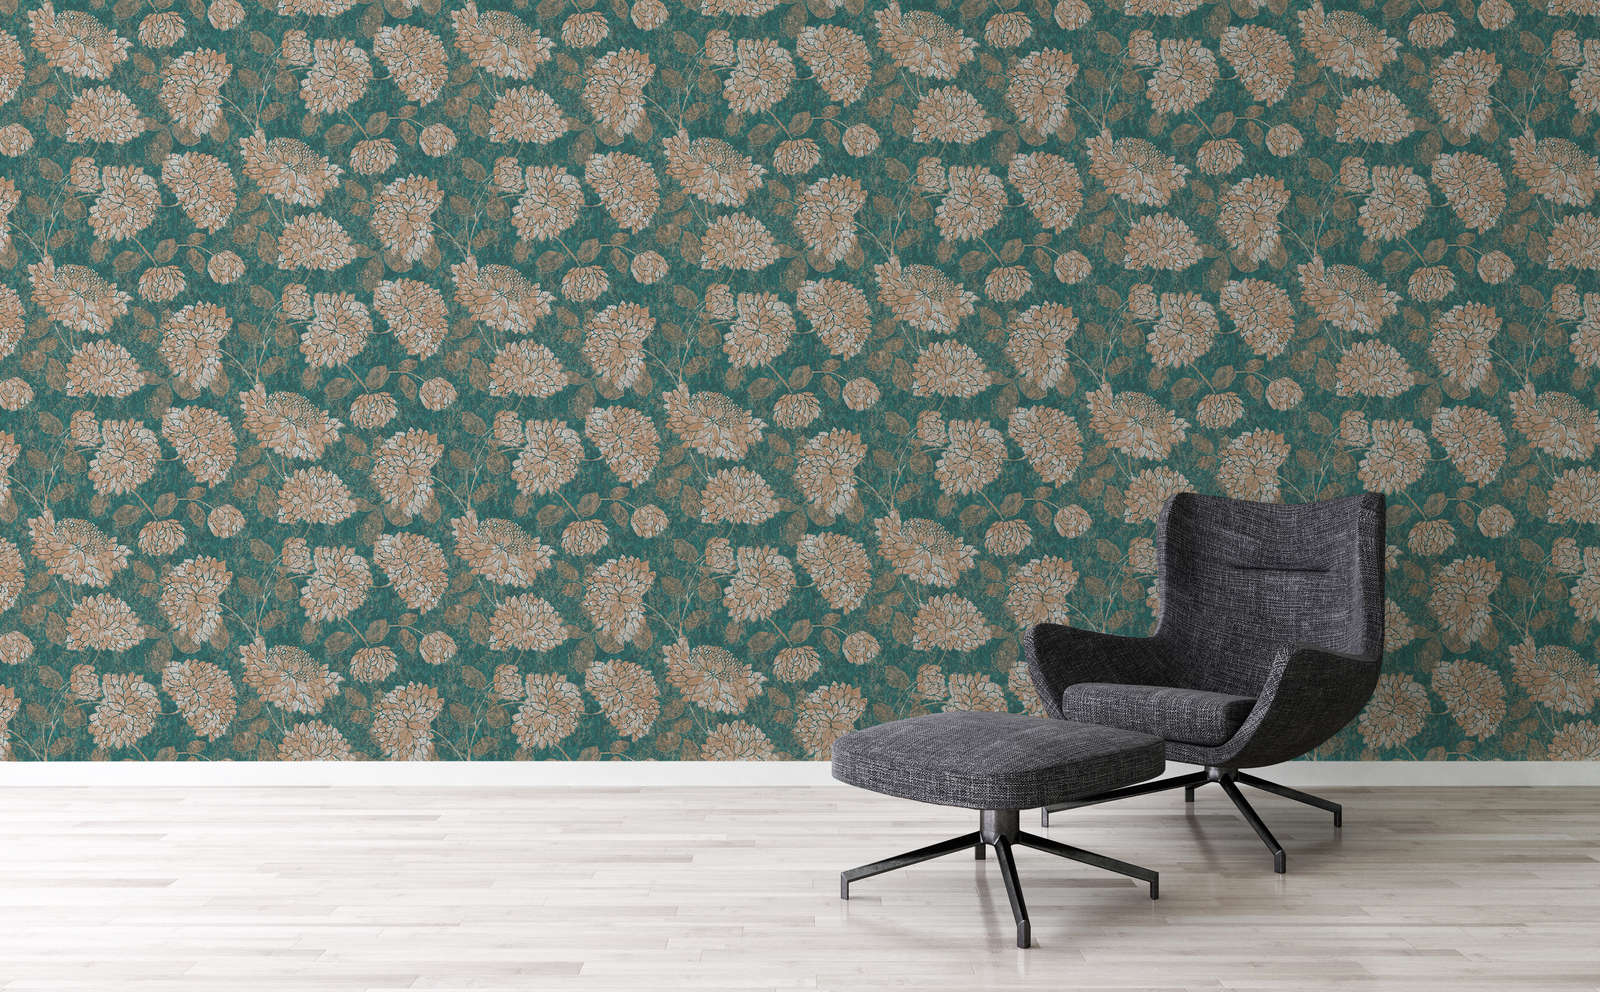             Floral wallpaper with floral pattern slightly shiny - green, gold
        